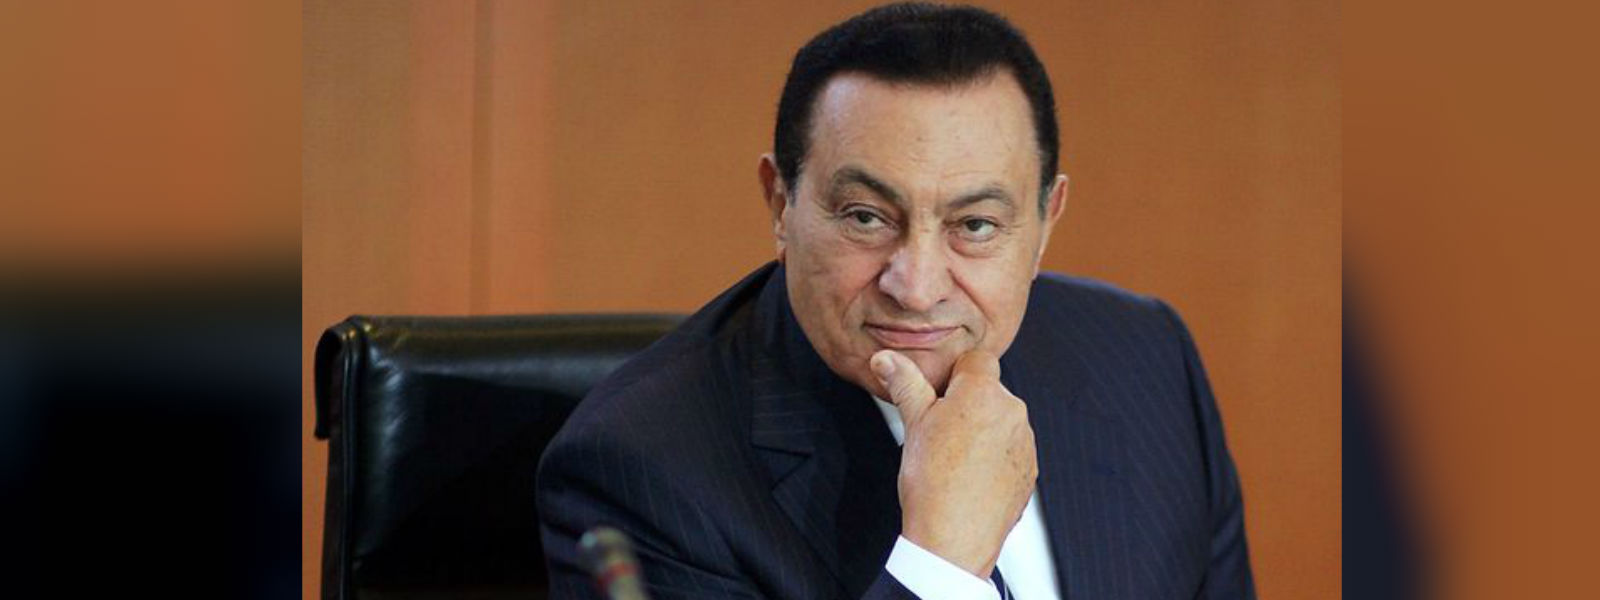 Ousted Egyptian President Hosni Mubarak passes away at the age of 91